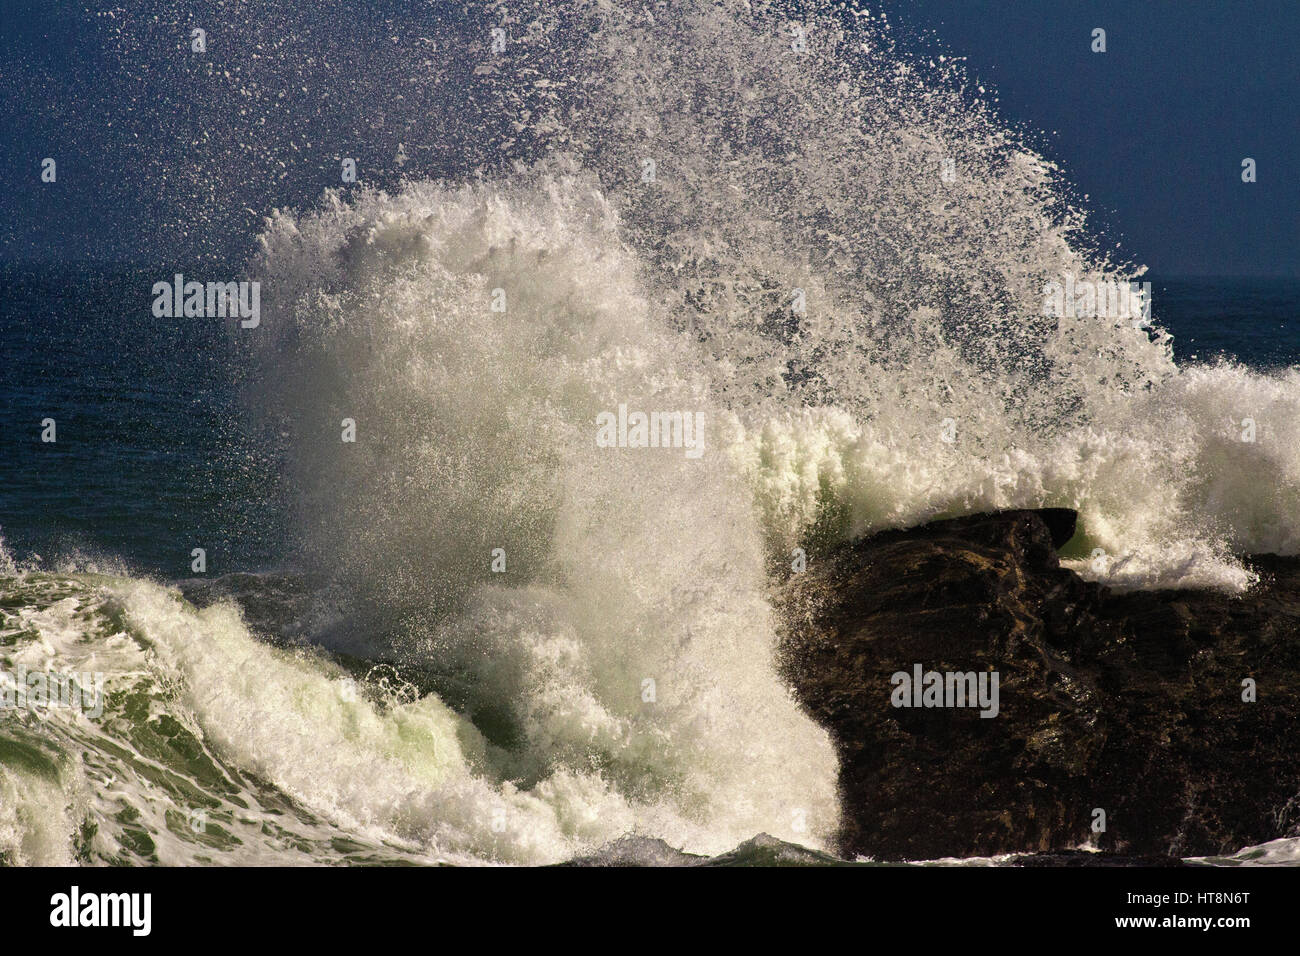 Spray from the waves hitting the rocks at Diaz Point, Luderitz, Namibia Stock Photo